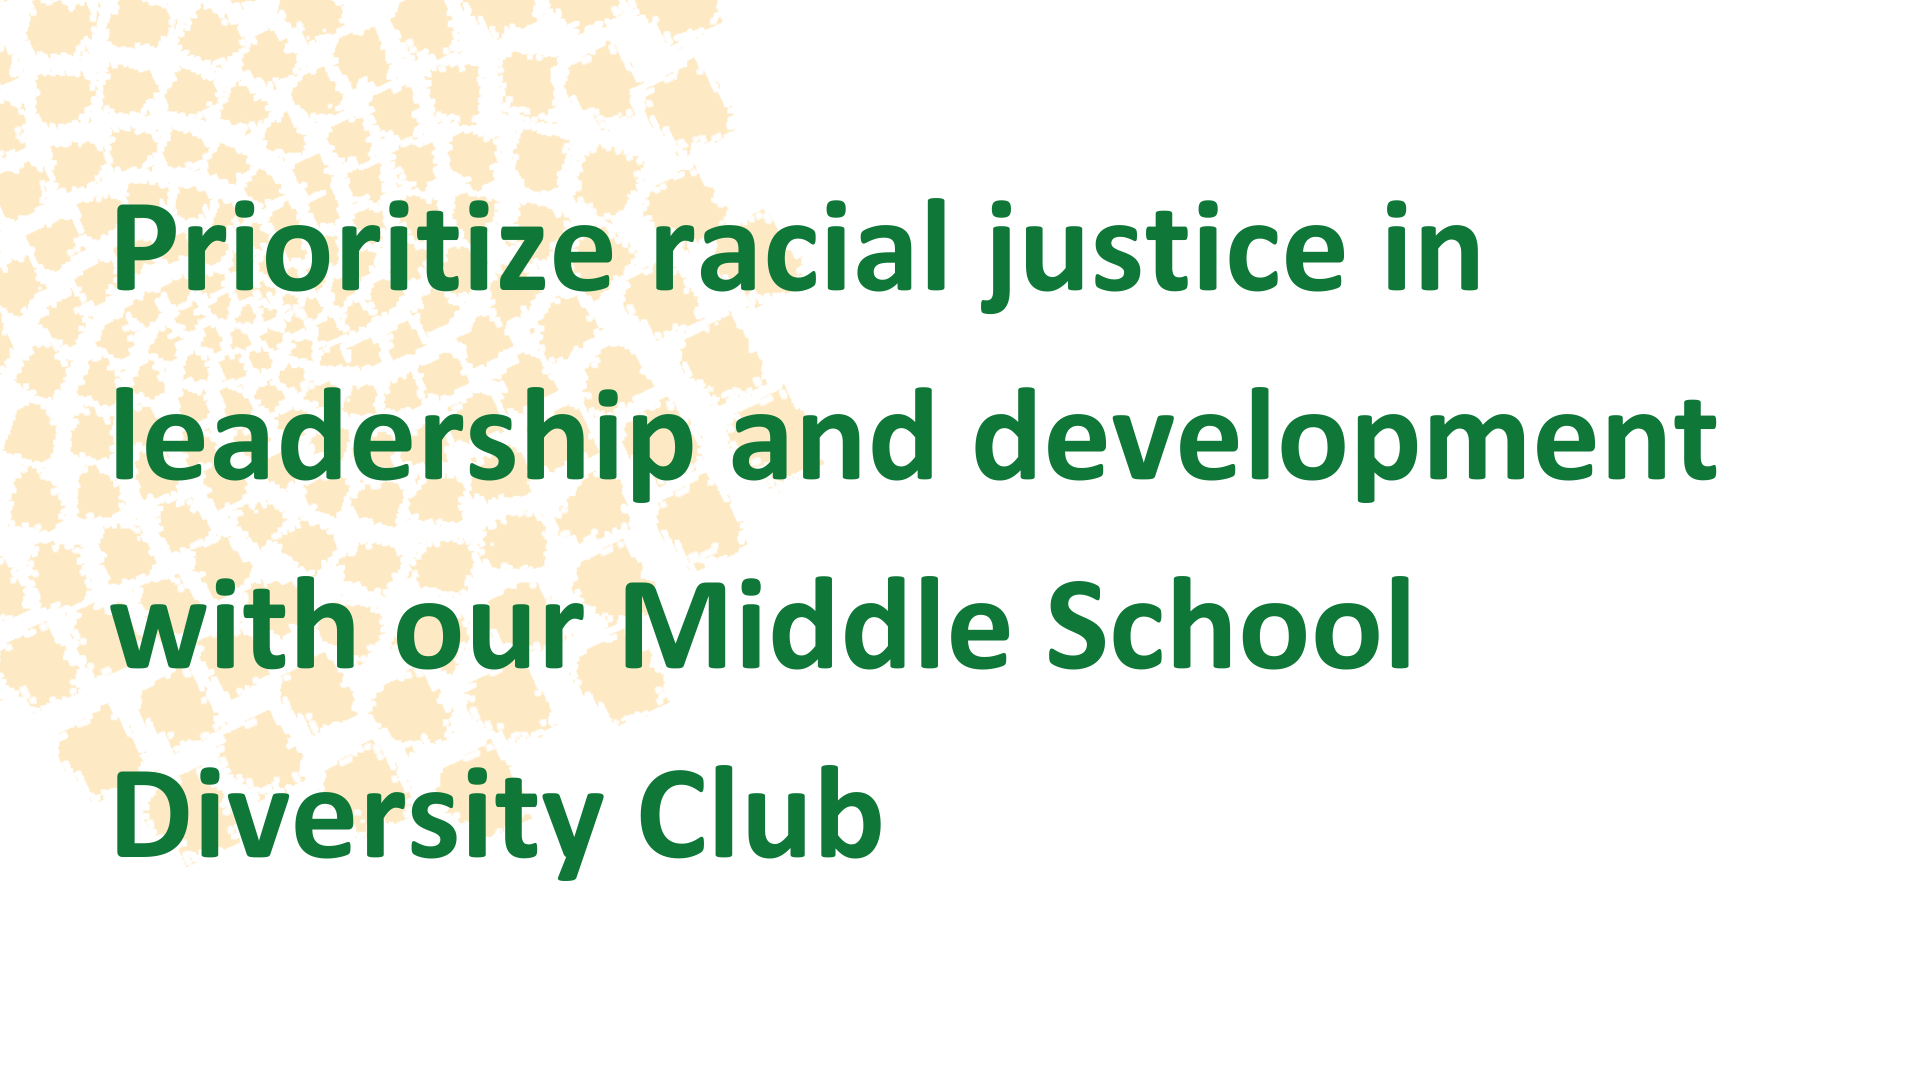 Quality professional development focused on race, racism, and oppression-6.png